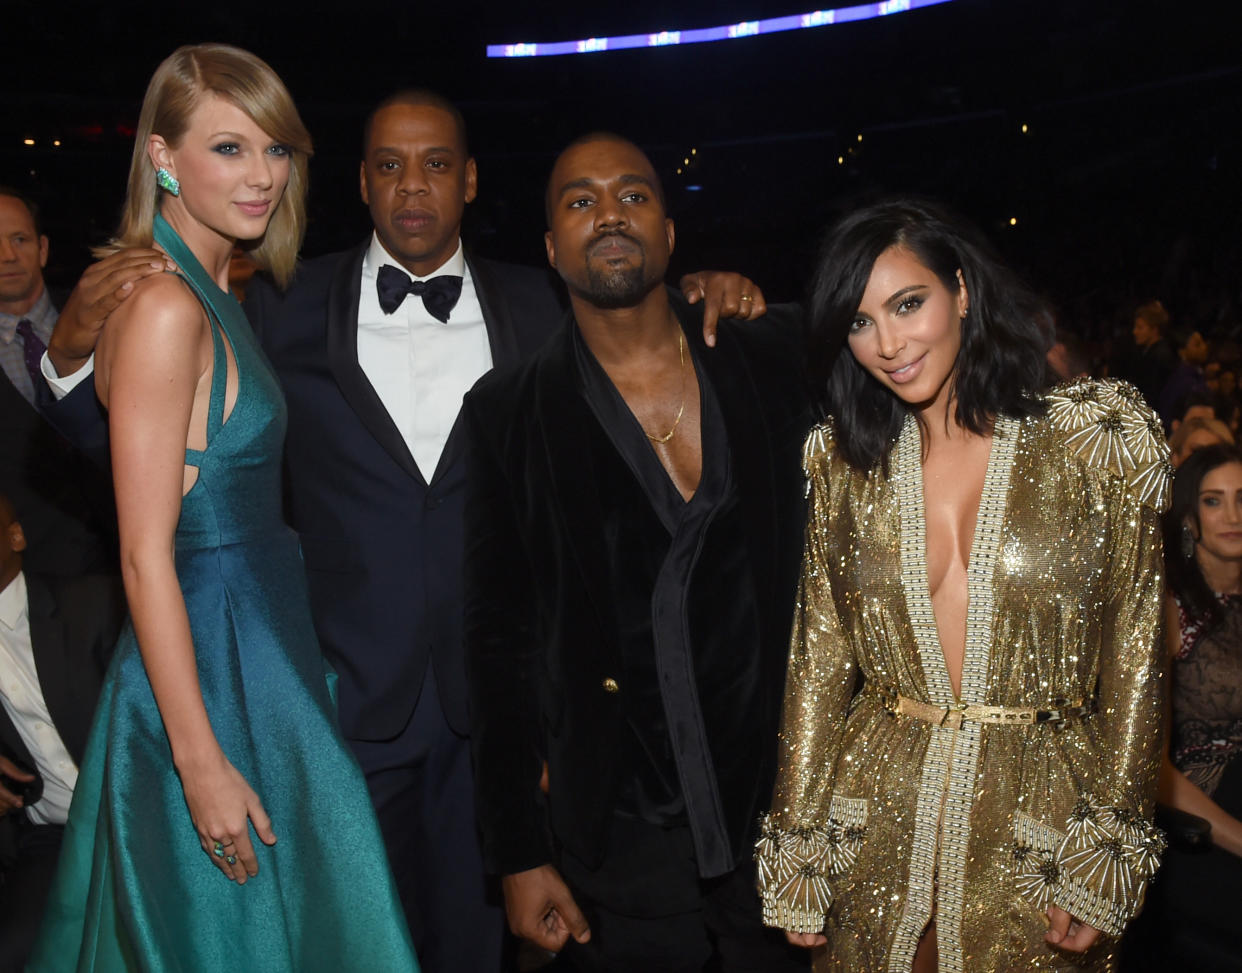 Recording Artists Taylor Swift, Jay Z and Kanye West and tv personality Kim Kardashian attend The 57th Annual GRAMMY Awards at the STAPLES Center on February 8, 2015 in Los Angeles, California. / Credit: Larry Busacca/Getty Images for NARAS